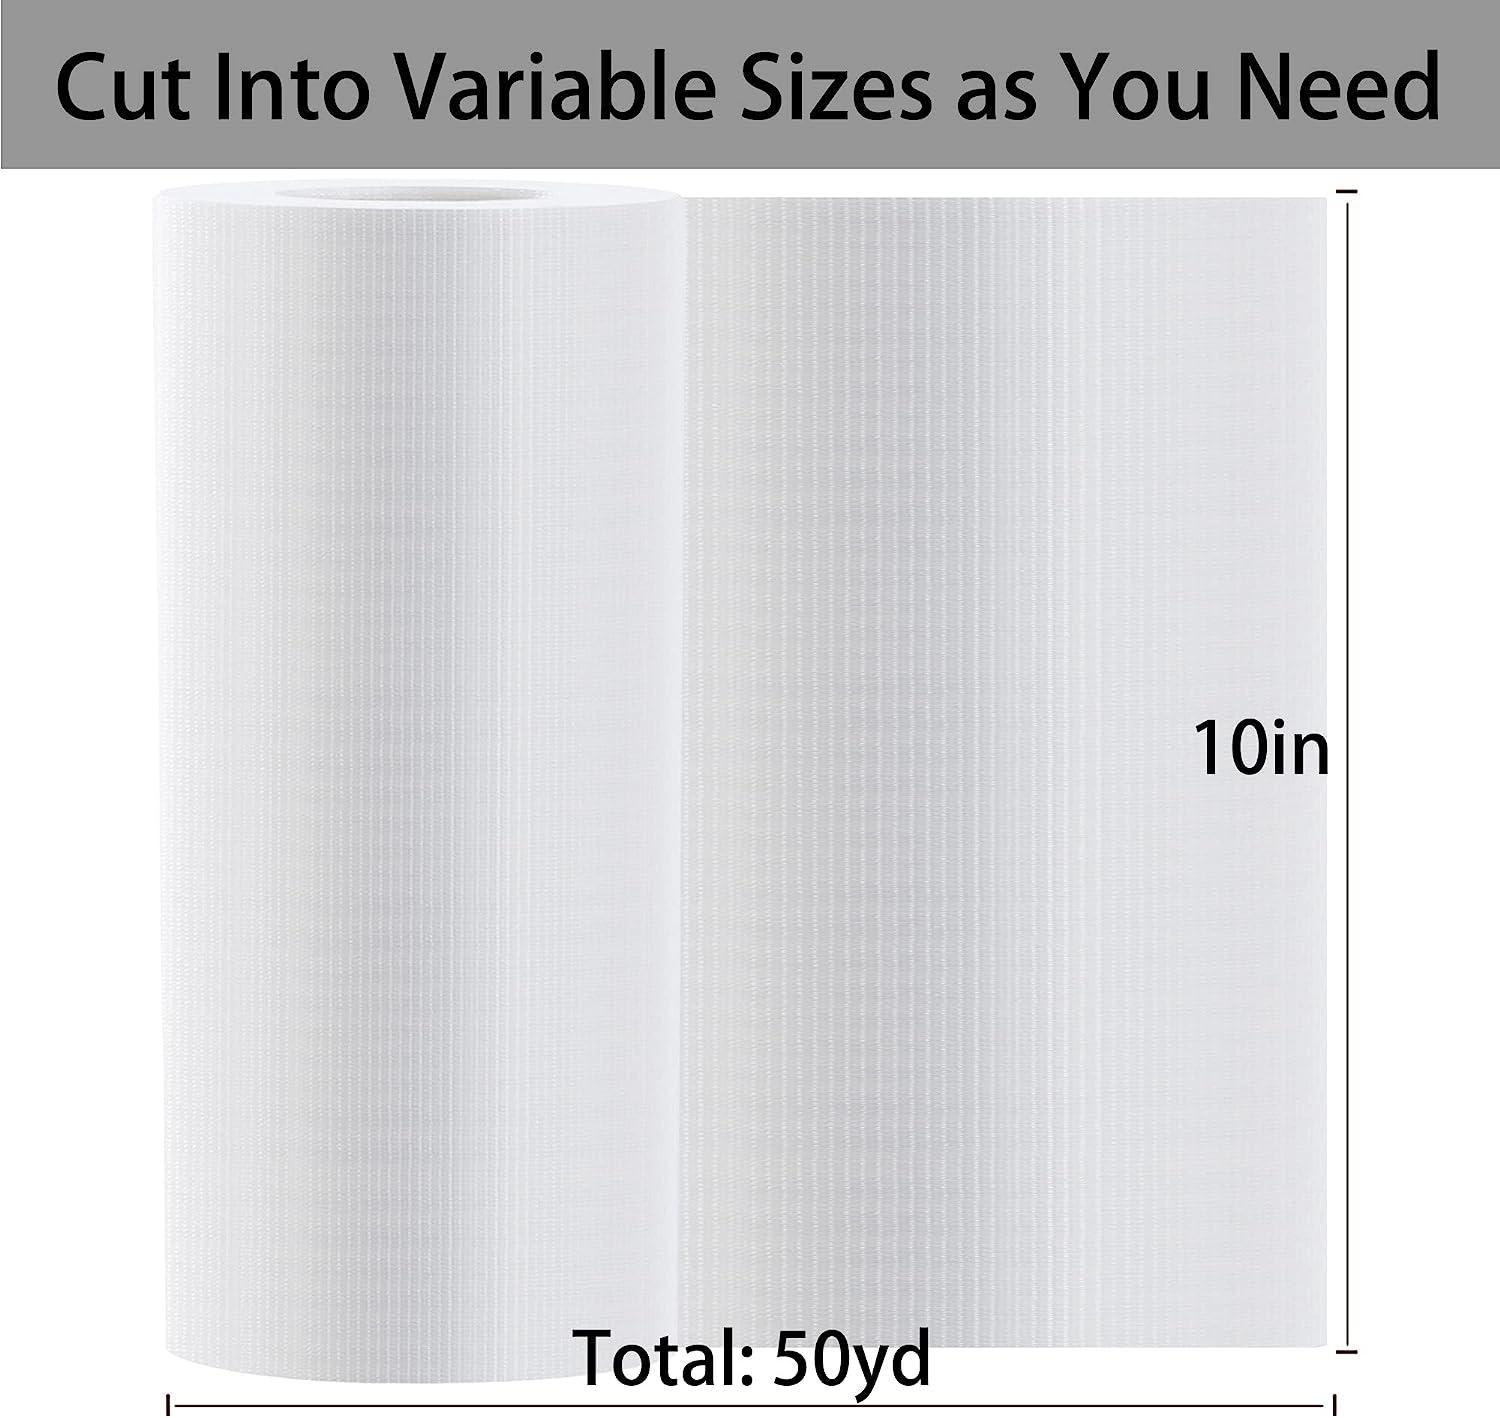 Cut Away Embroidery Stabilizer Backing (10in x 50yd), Seneme Stabilizer for Embroidery - Medium Weight 2.5oz Cutaway Embroidery Stabilizers - for